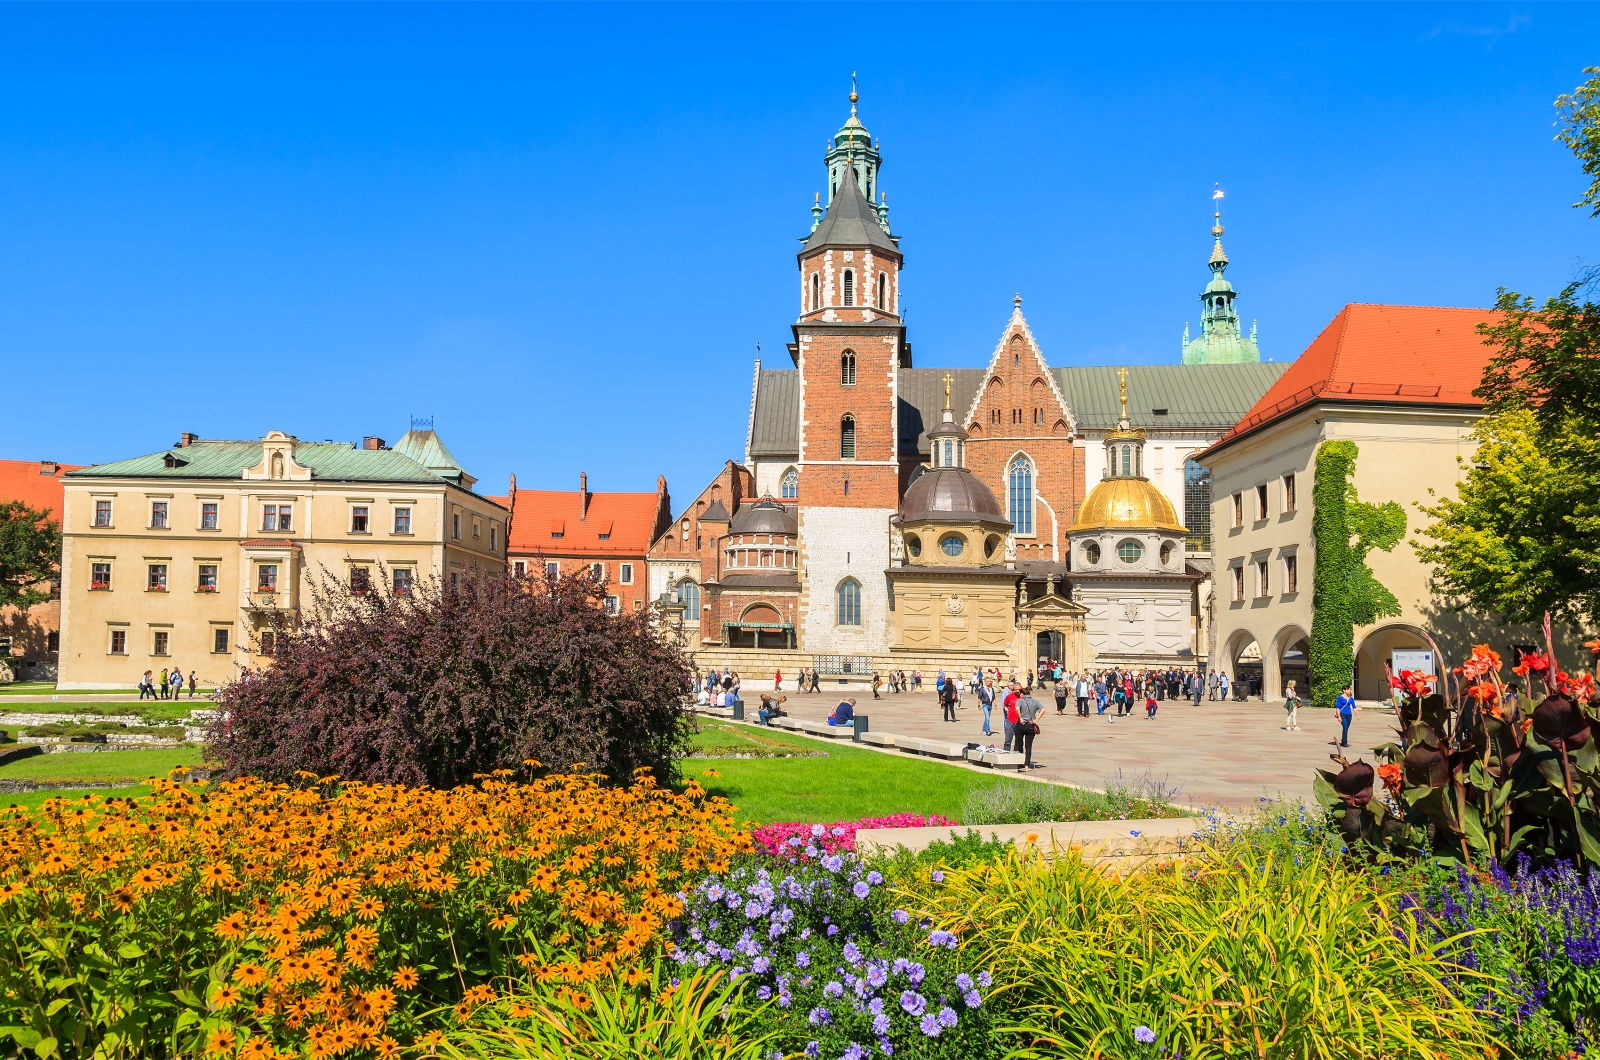 Wawel Castle Square at Krakow in Poland